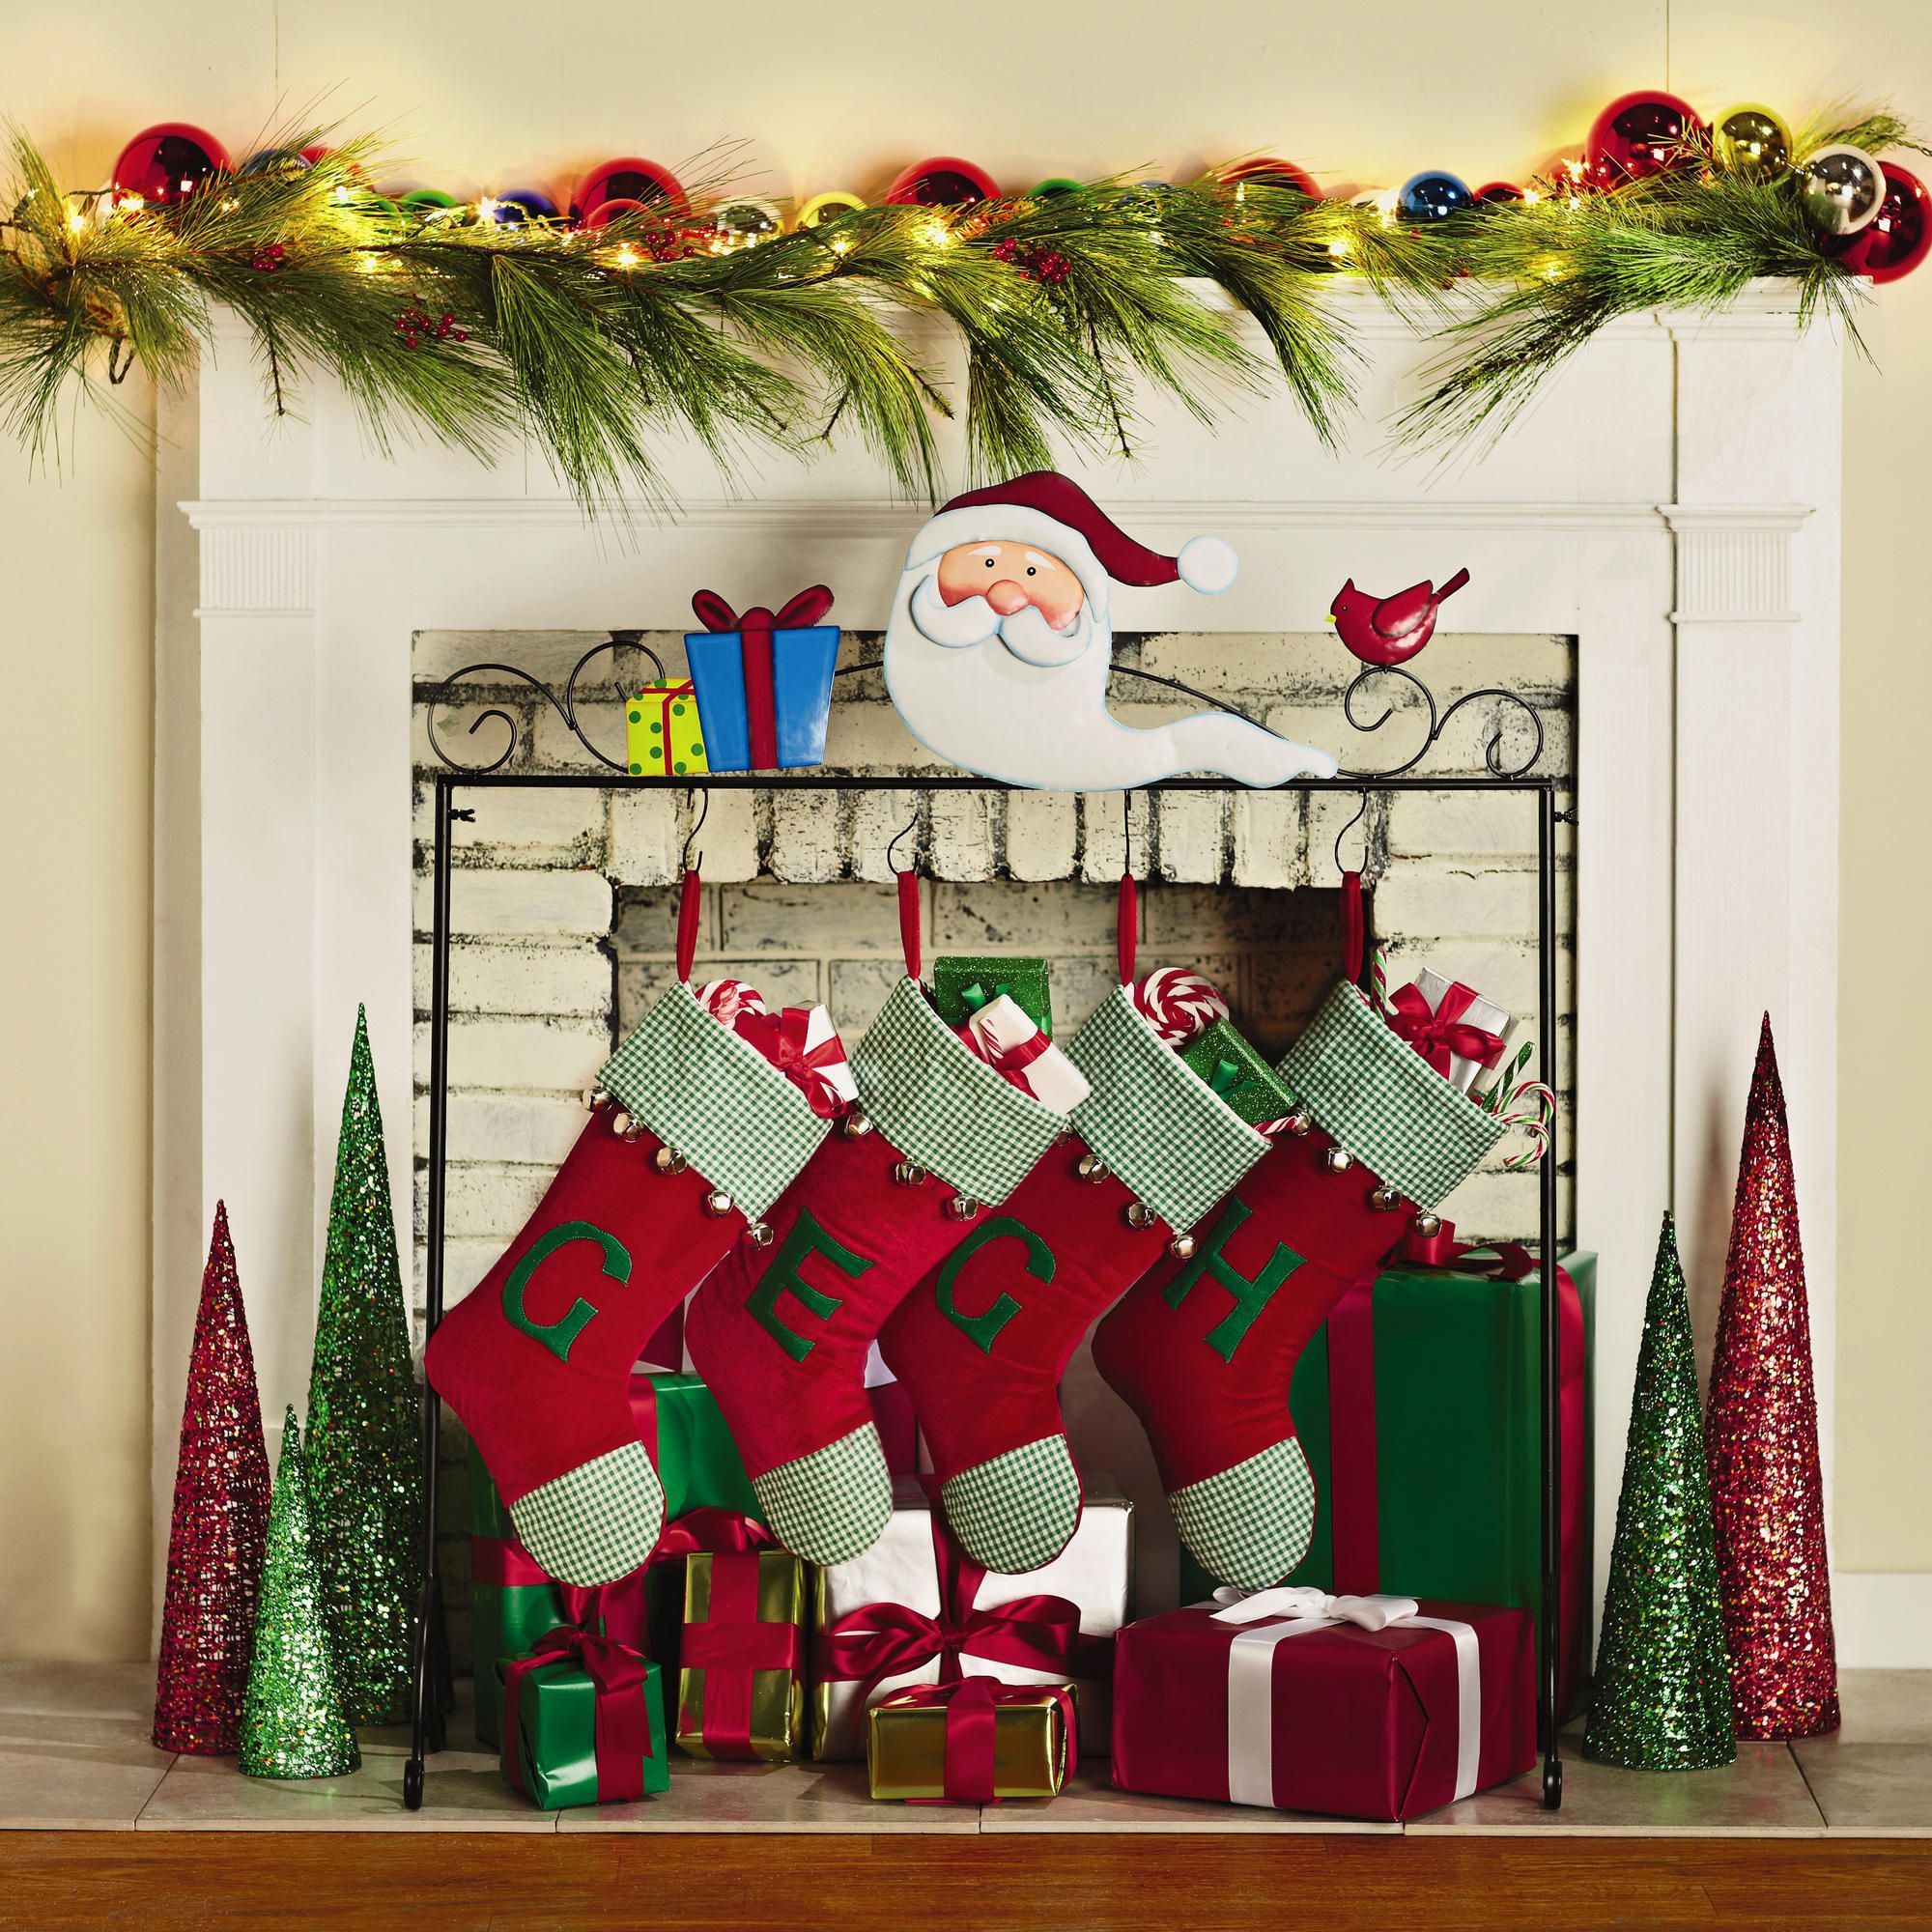 Christmas Stocking Floor Stands
 The top 30 Ideas About Christmas Stocking Floor Stands